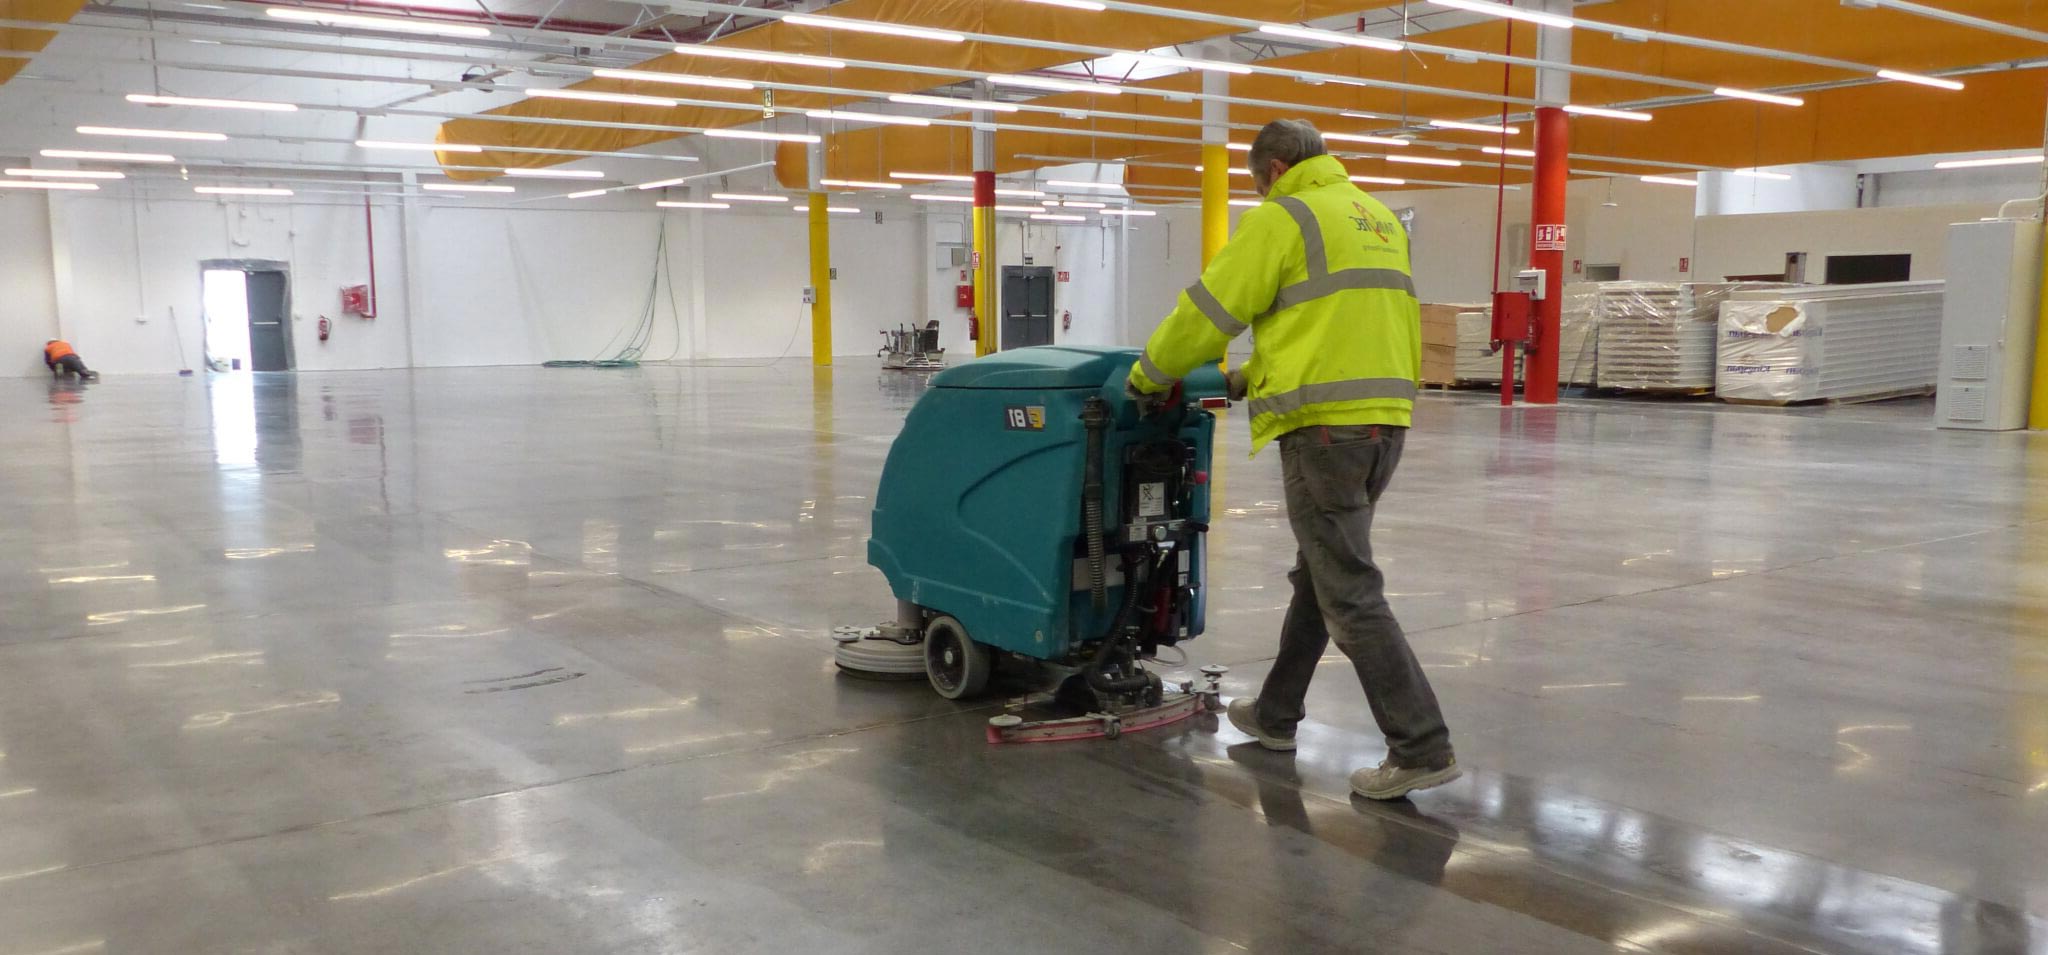 Pro Line Janitorial provides manufacturing and warehouse cleaning services